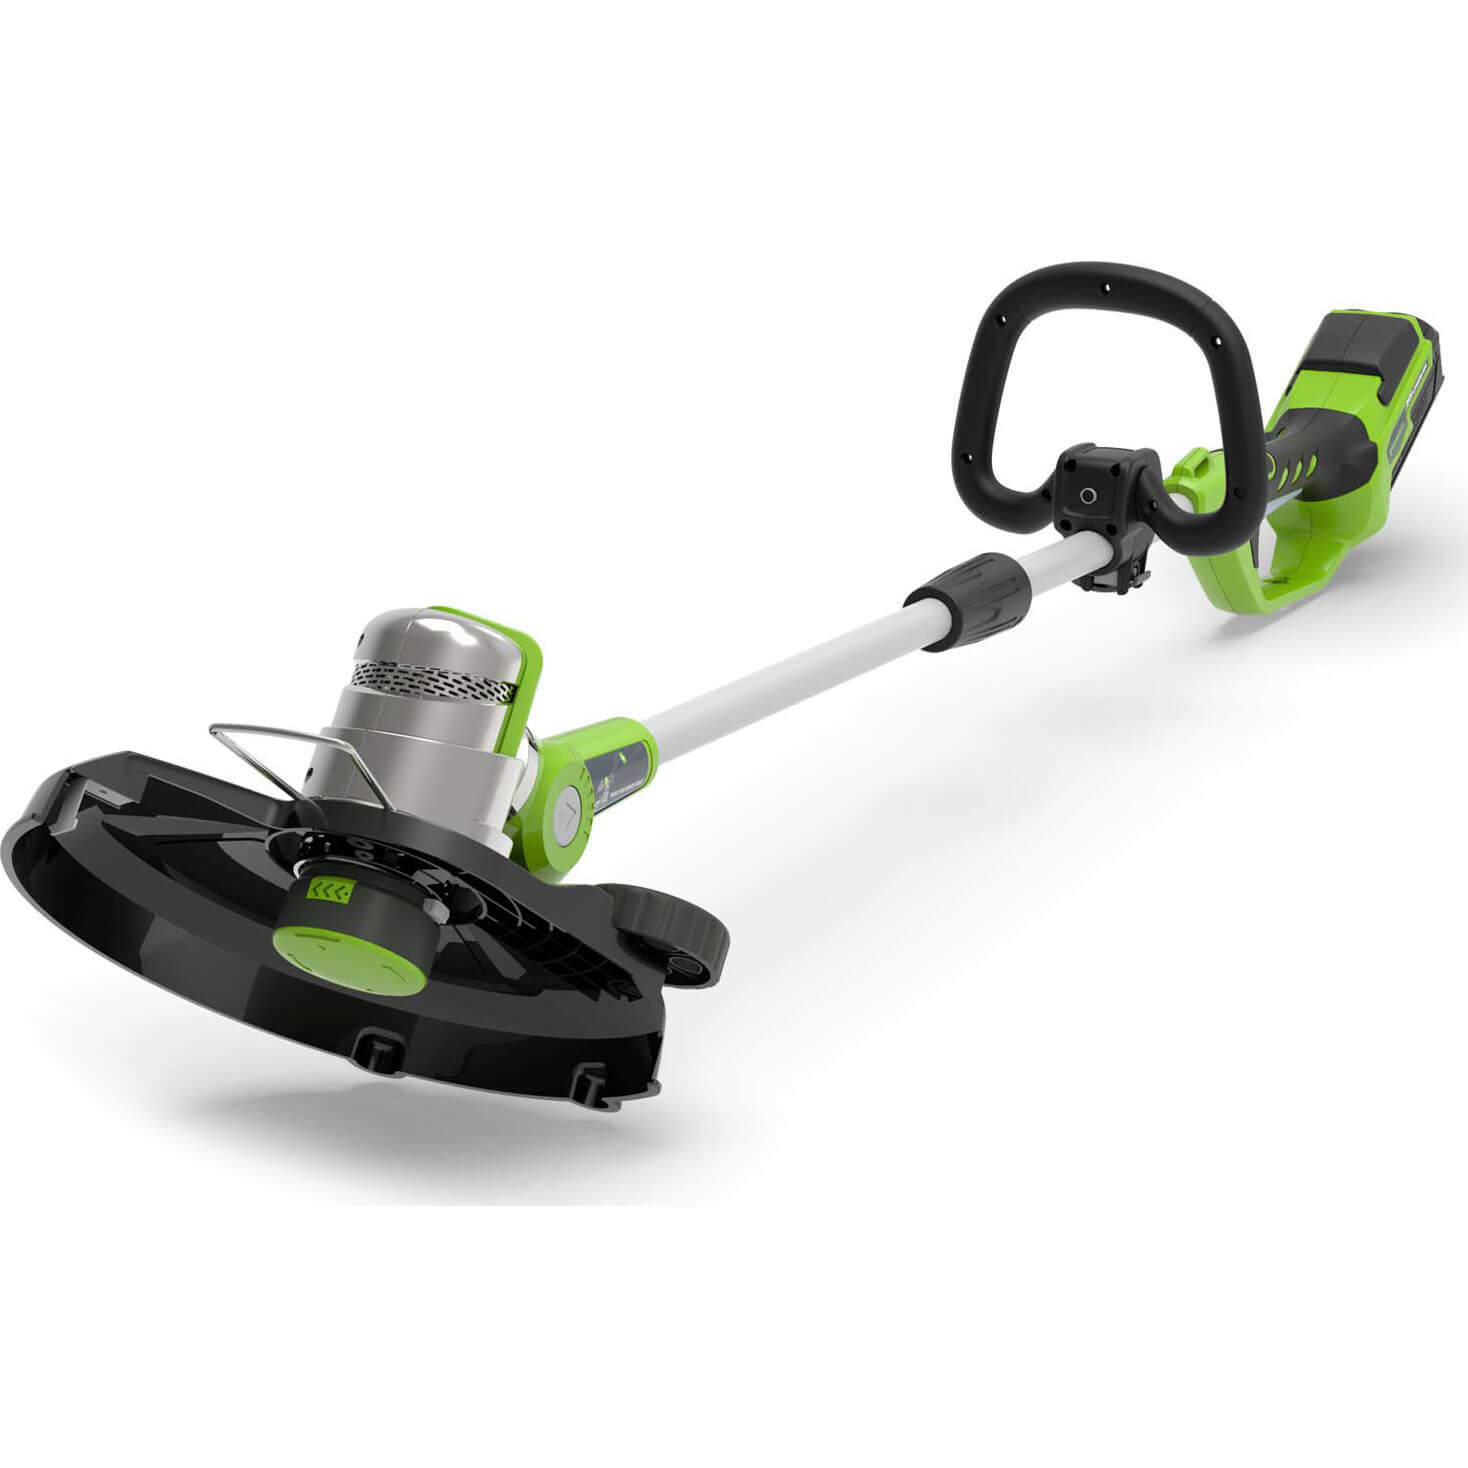 Greenworks G24LT 24v Cordless Deluxe Grass Trimmer and Edger 300mm 1 x 2ah Li-ion Charger